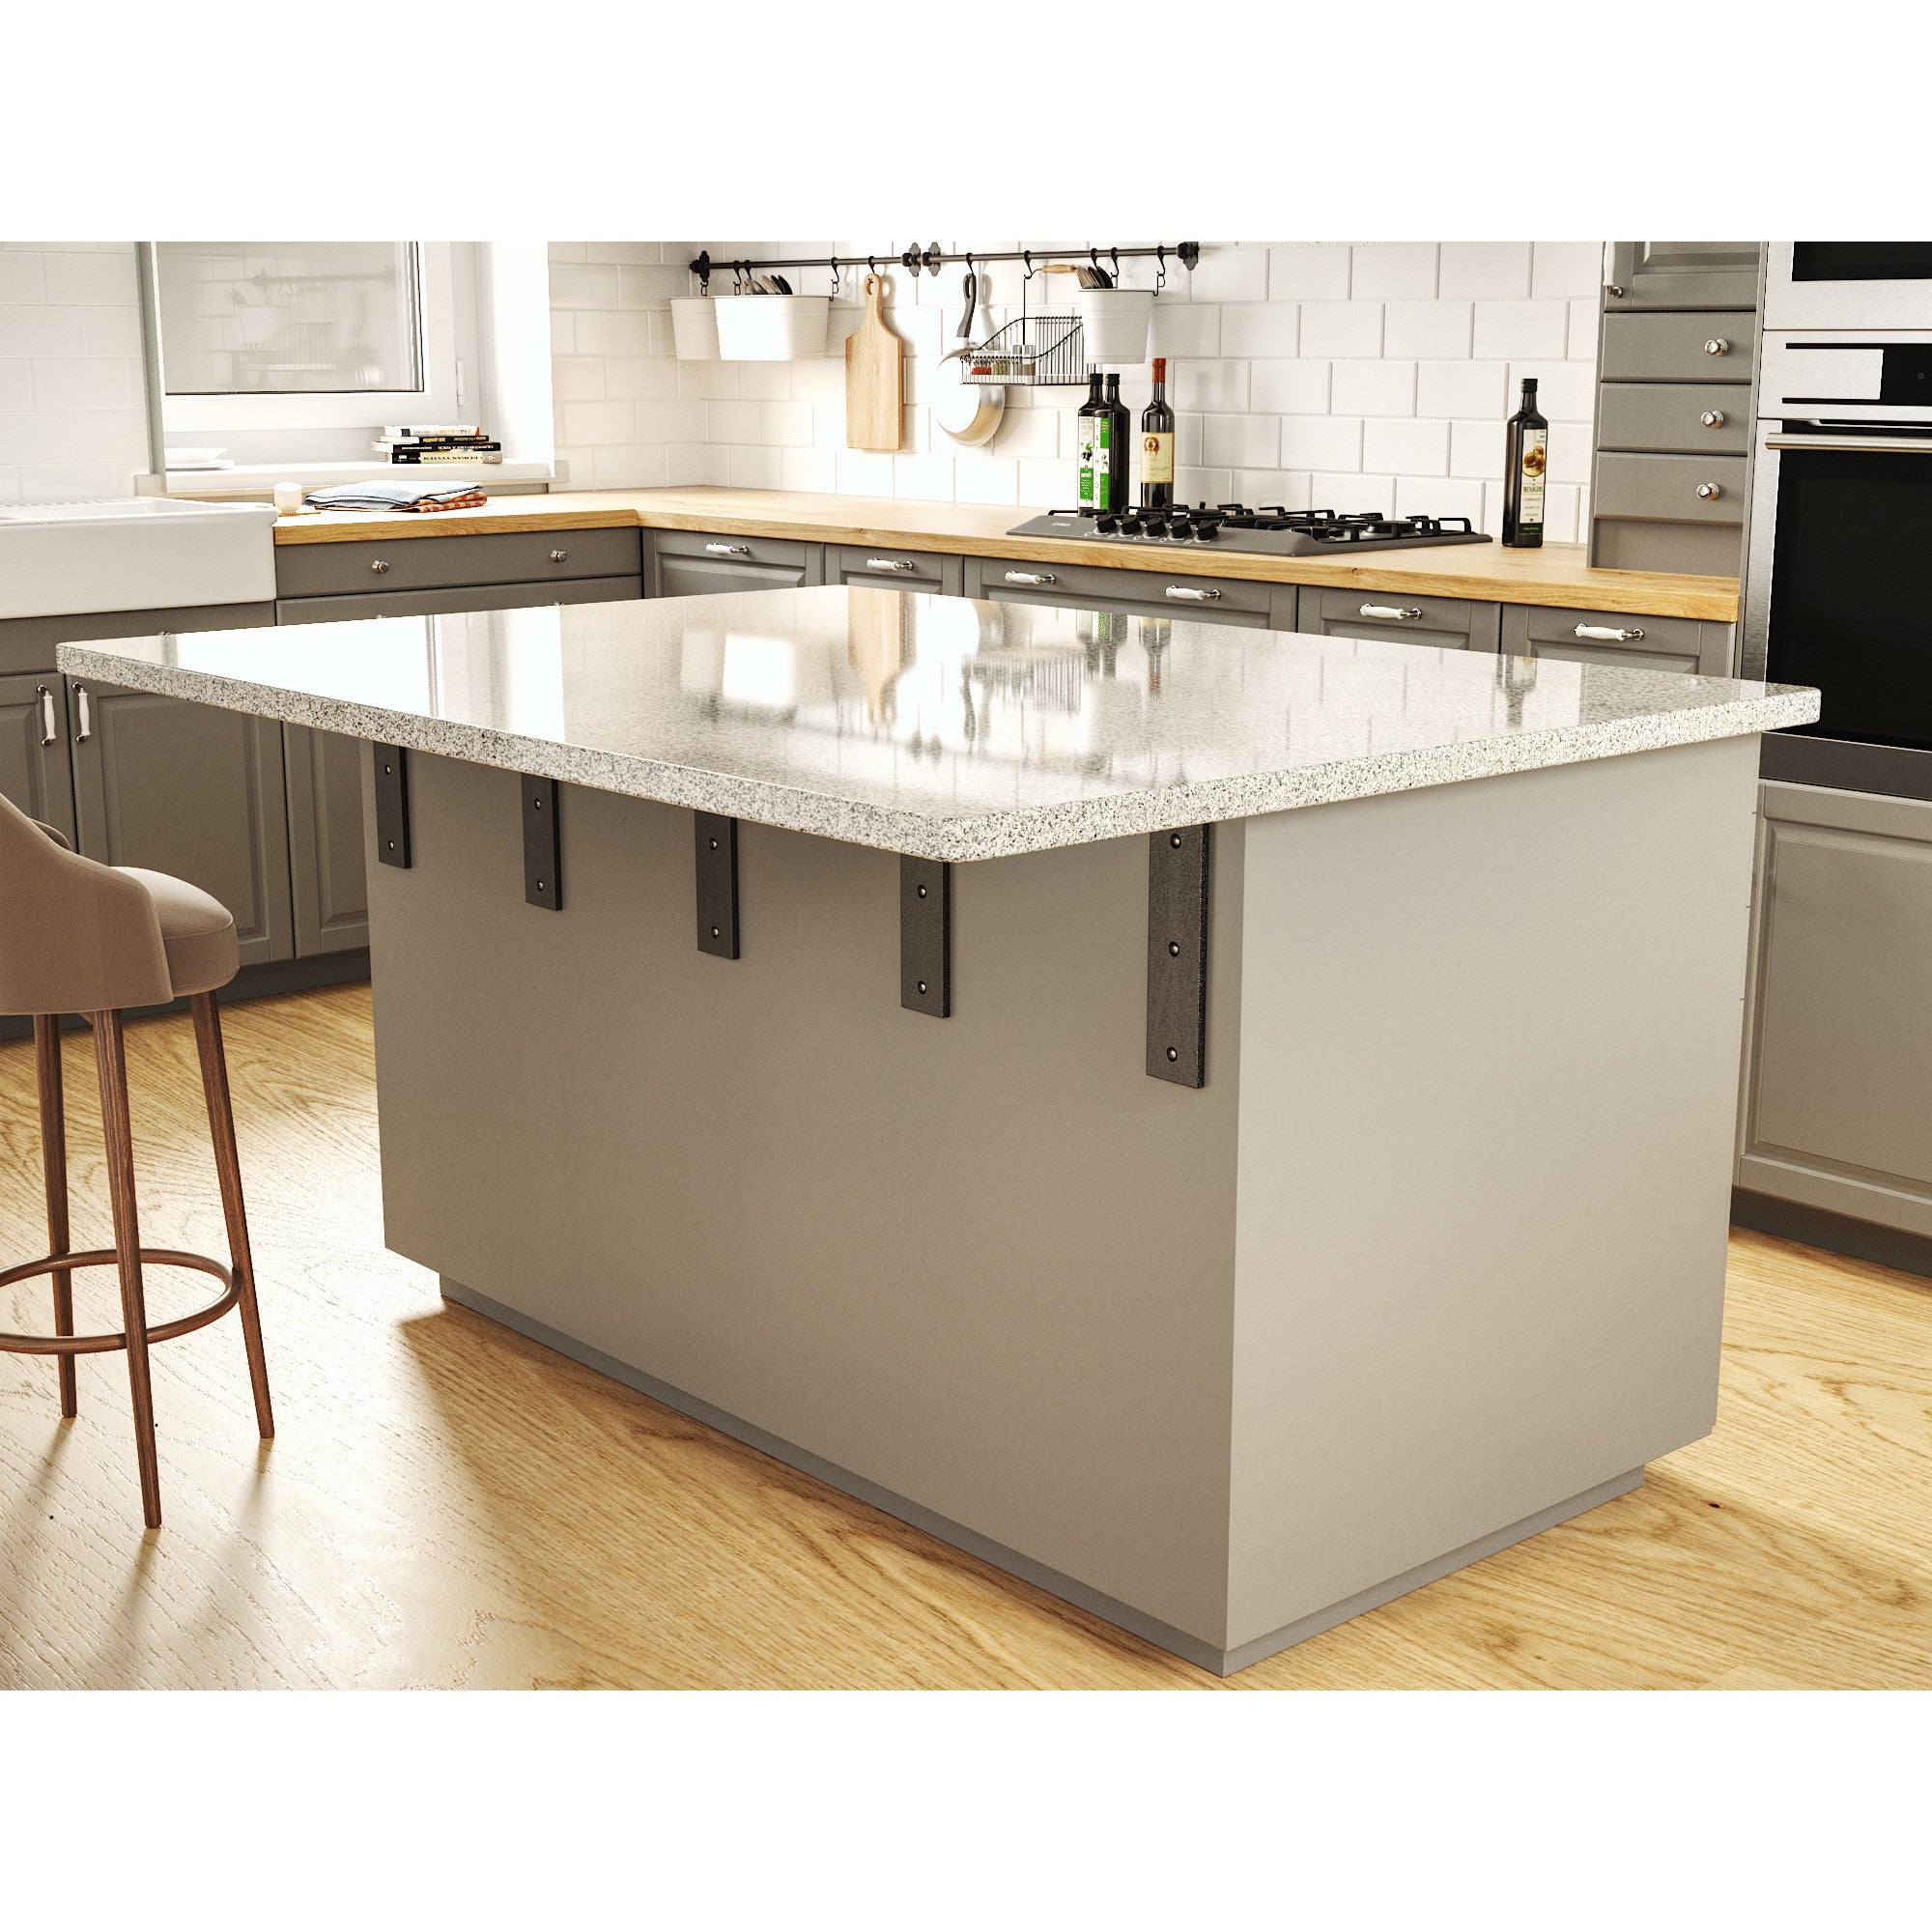 Floating Countertop Wall Bracket Create A Floating Desk Or Bar